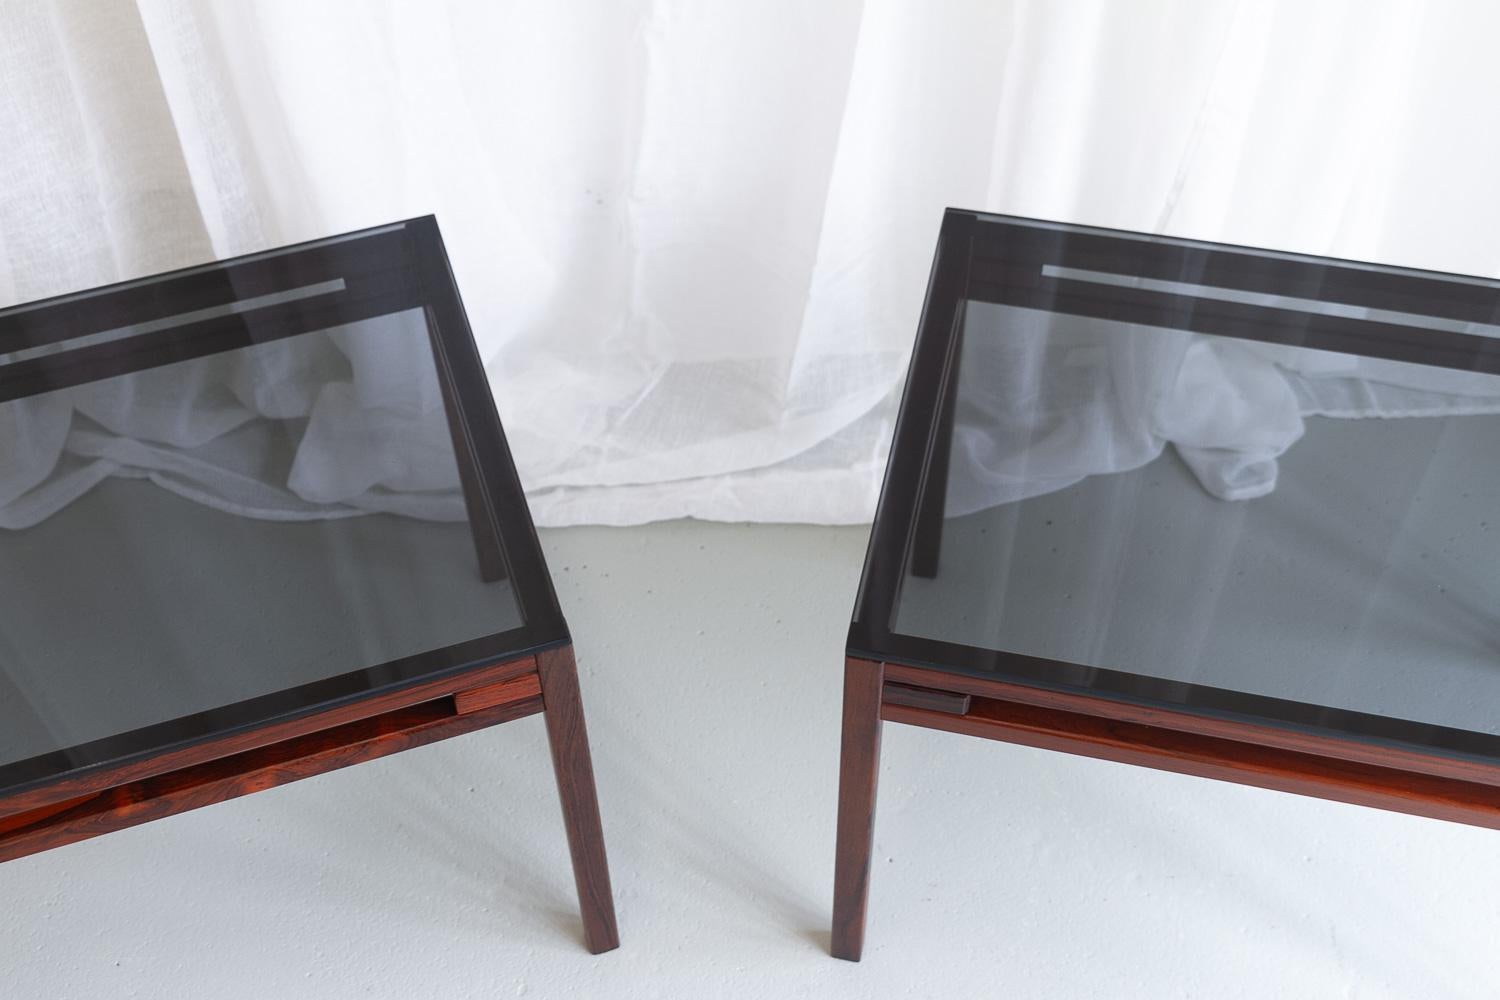 Danish Modern Side Tables in Rosewood and Glass, 1960s. Set of 2. For Sale 6